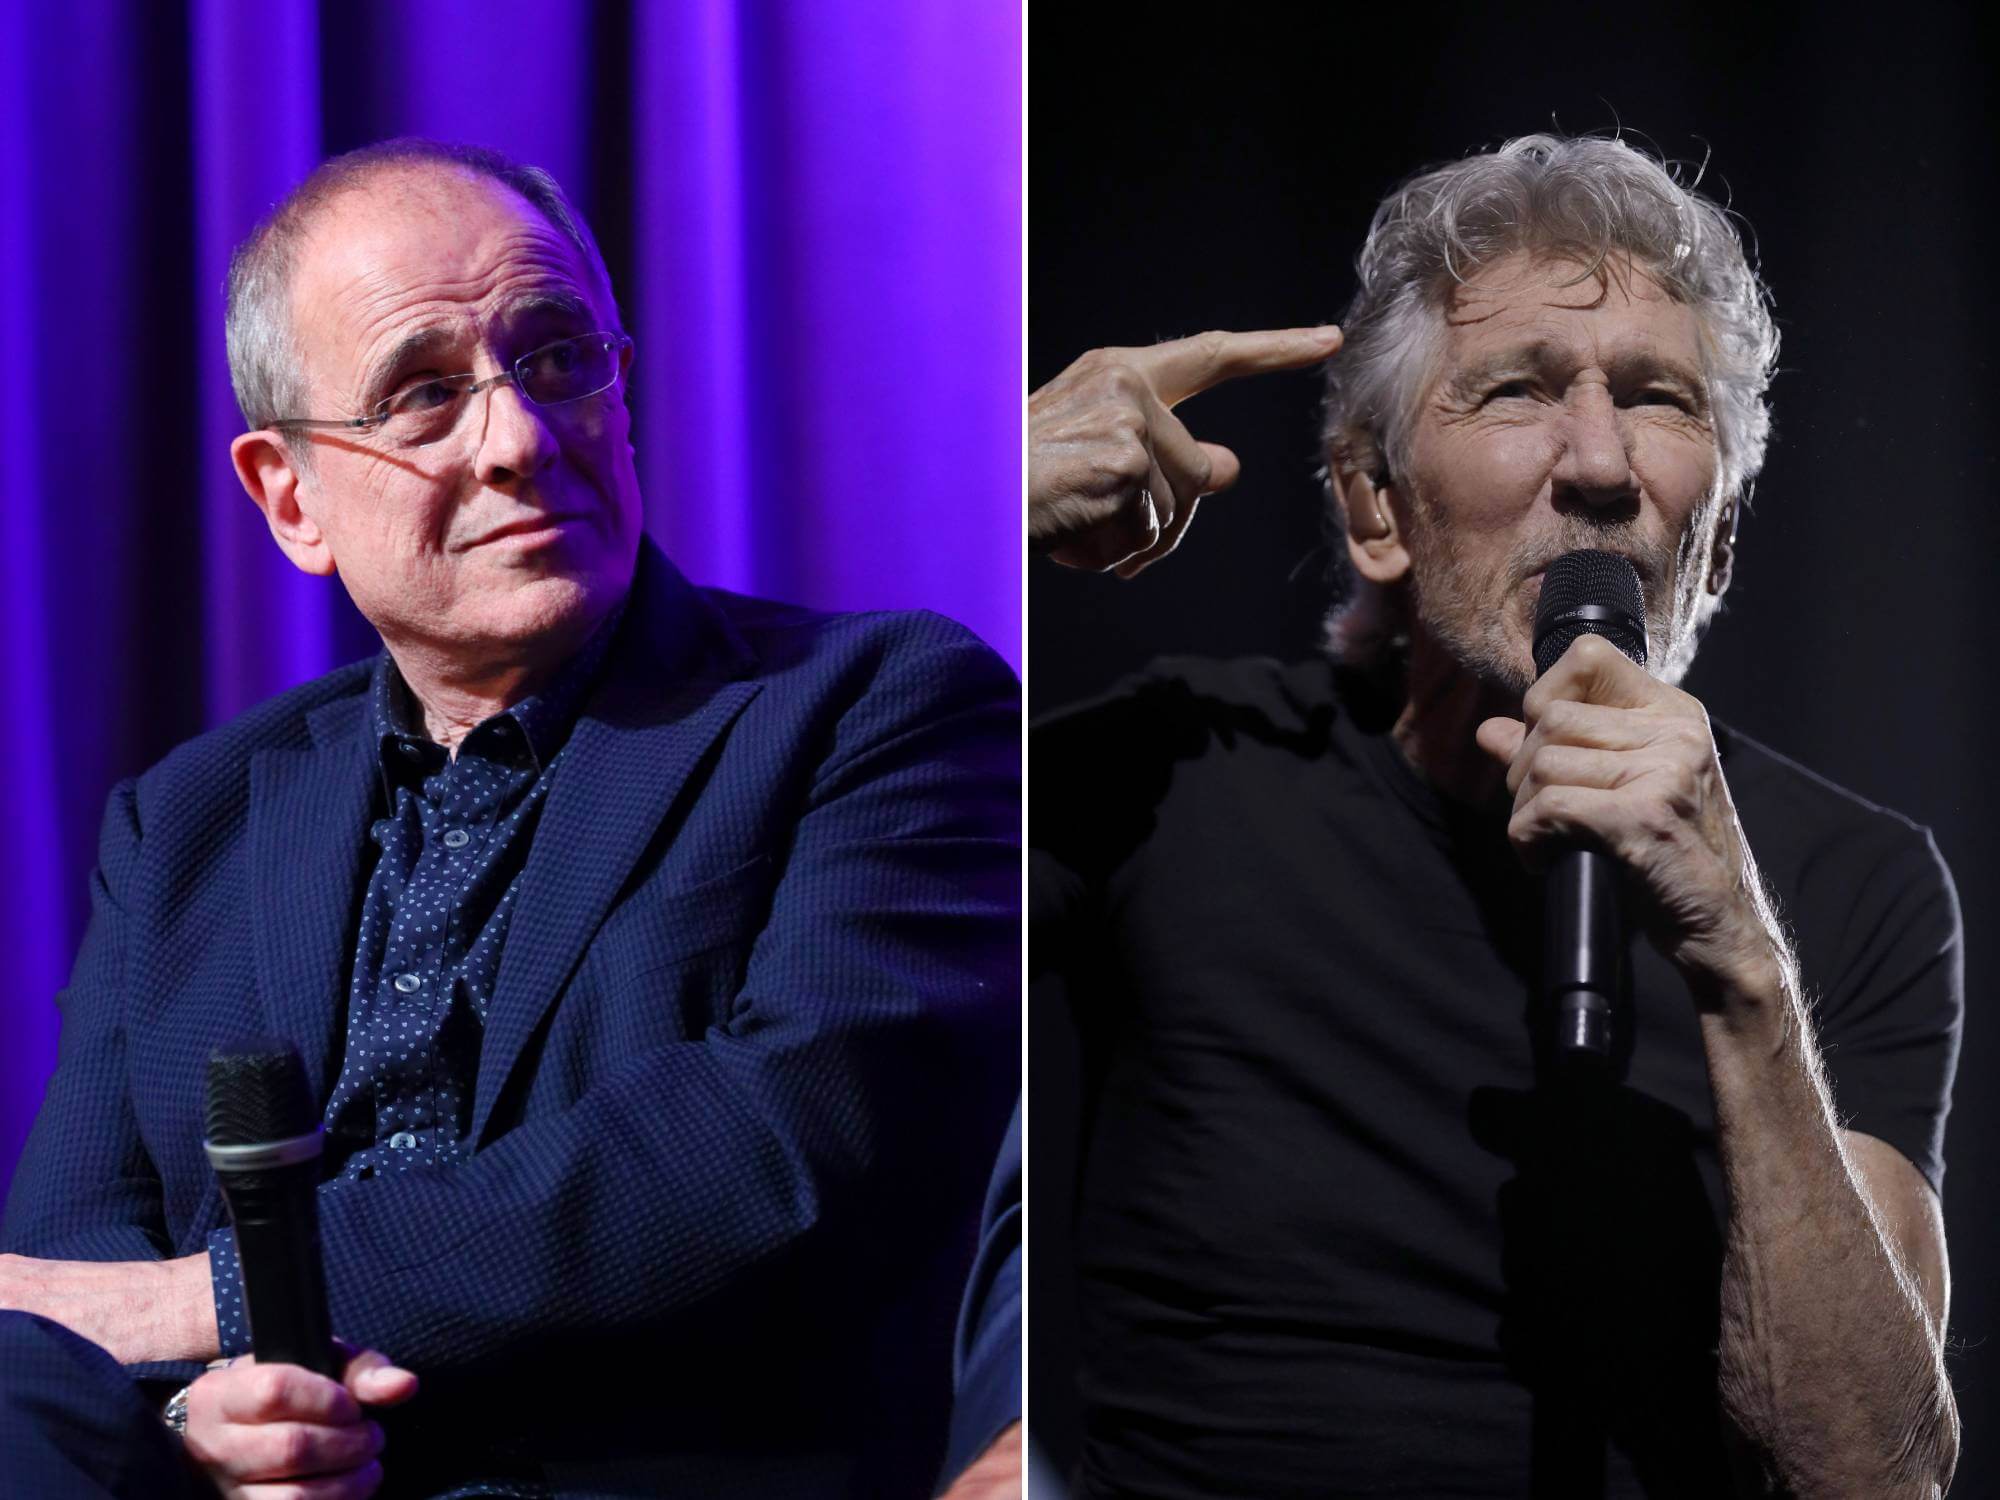 Bob Ezrin and Roger Waters